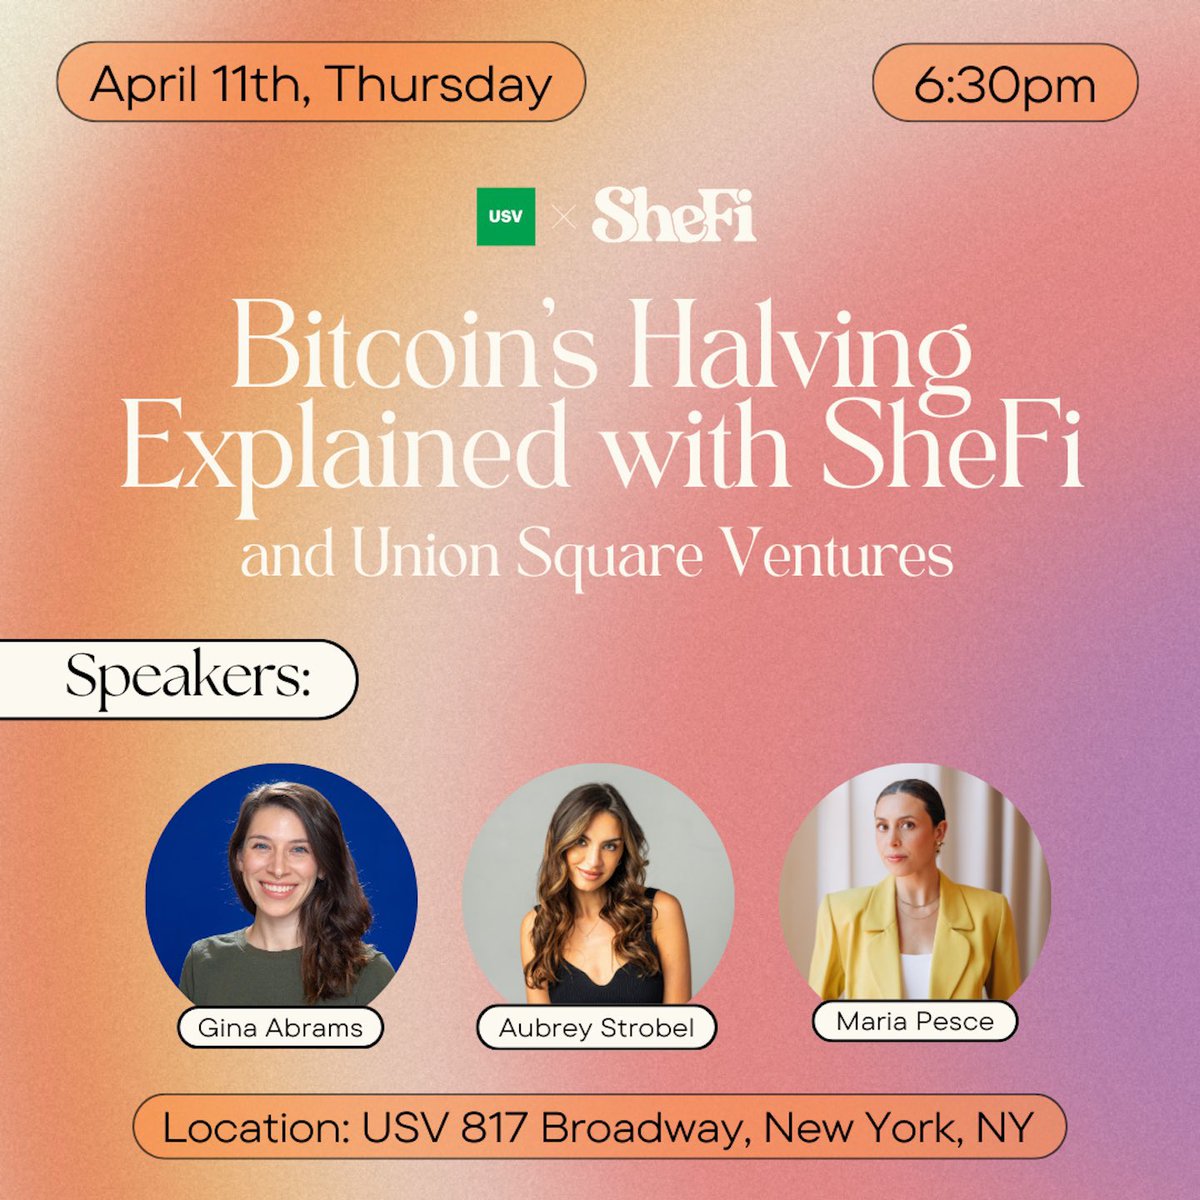 This corner of crypto is my favorite place to hang out. See you ladies tonight!🫶🫶🫶 @shefiorg @usv @Gina__Abrams @aubreystrobel @MariaPesce_ @maggielove_